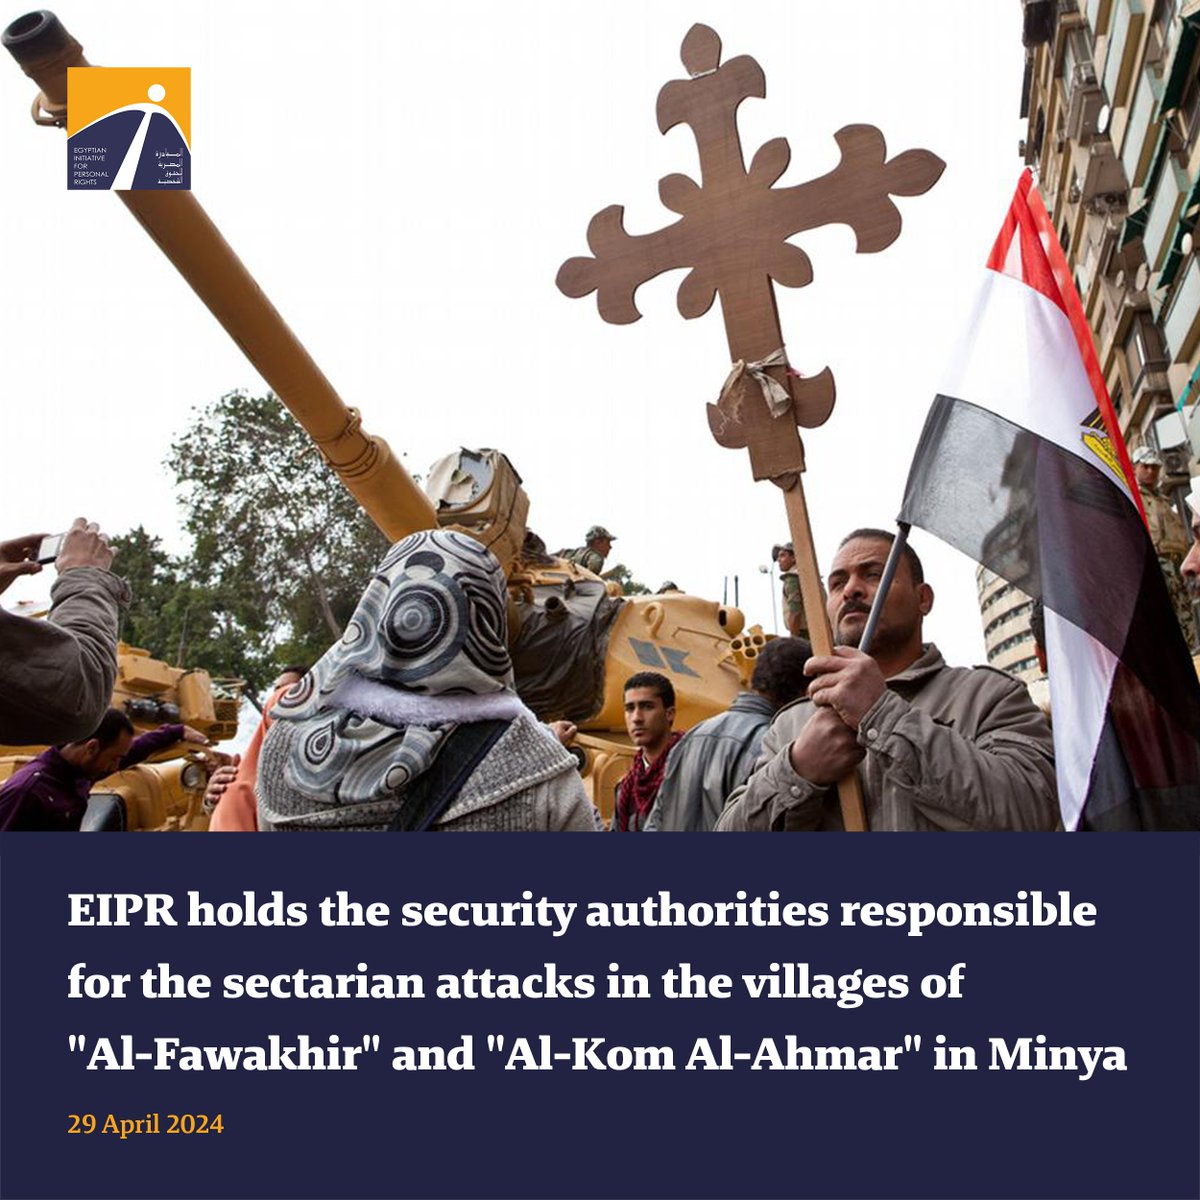 🔴 EIPR stresses that these attacks are not 'individual incidents', exceptional or accidental, noting that since September, three incidents have been related to the construction of churches in villages in Minya. 🔗 Read the full details and statement: tinyurl.com/yzw7mx6y